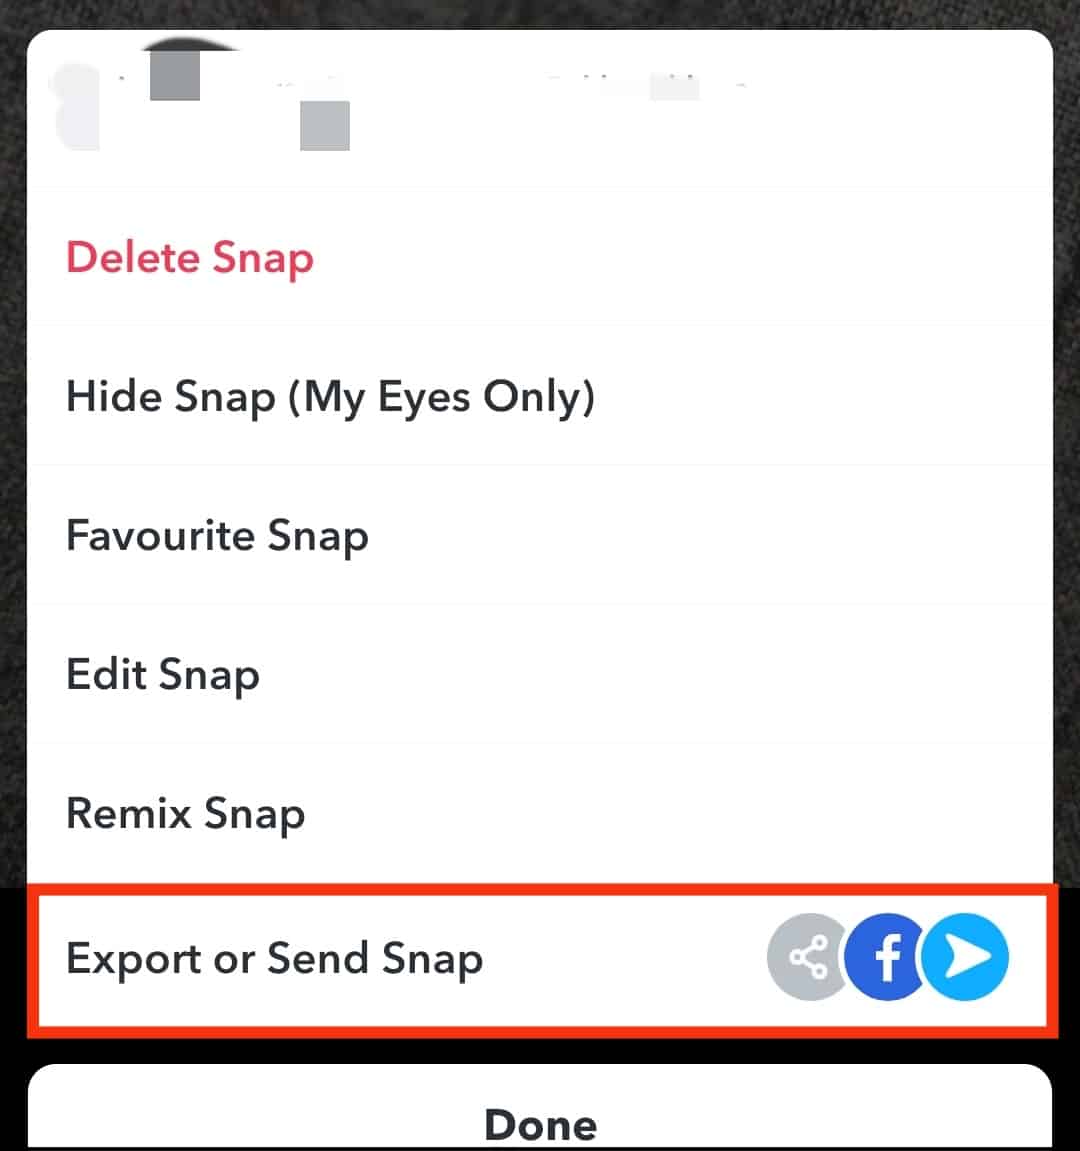 Press The Export Or Send Snap Option